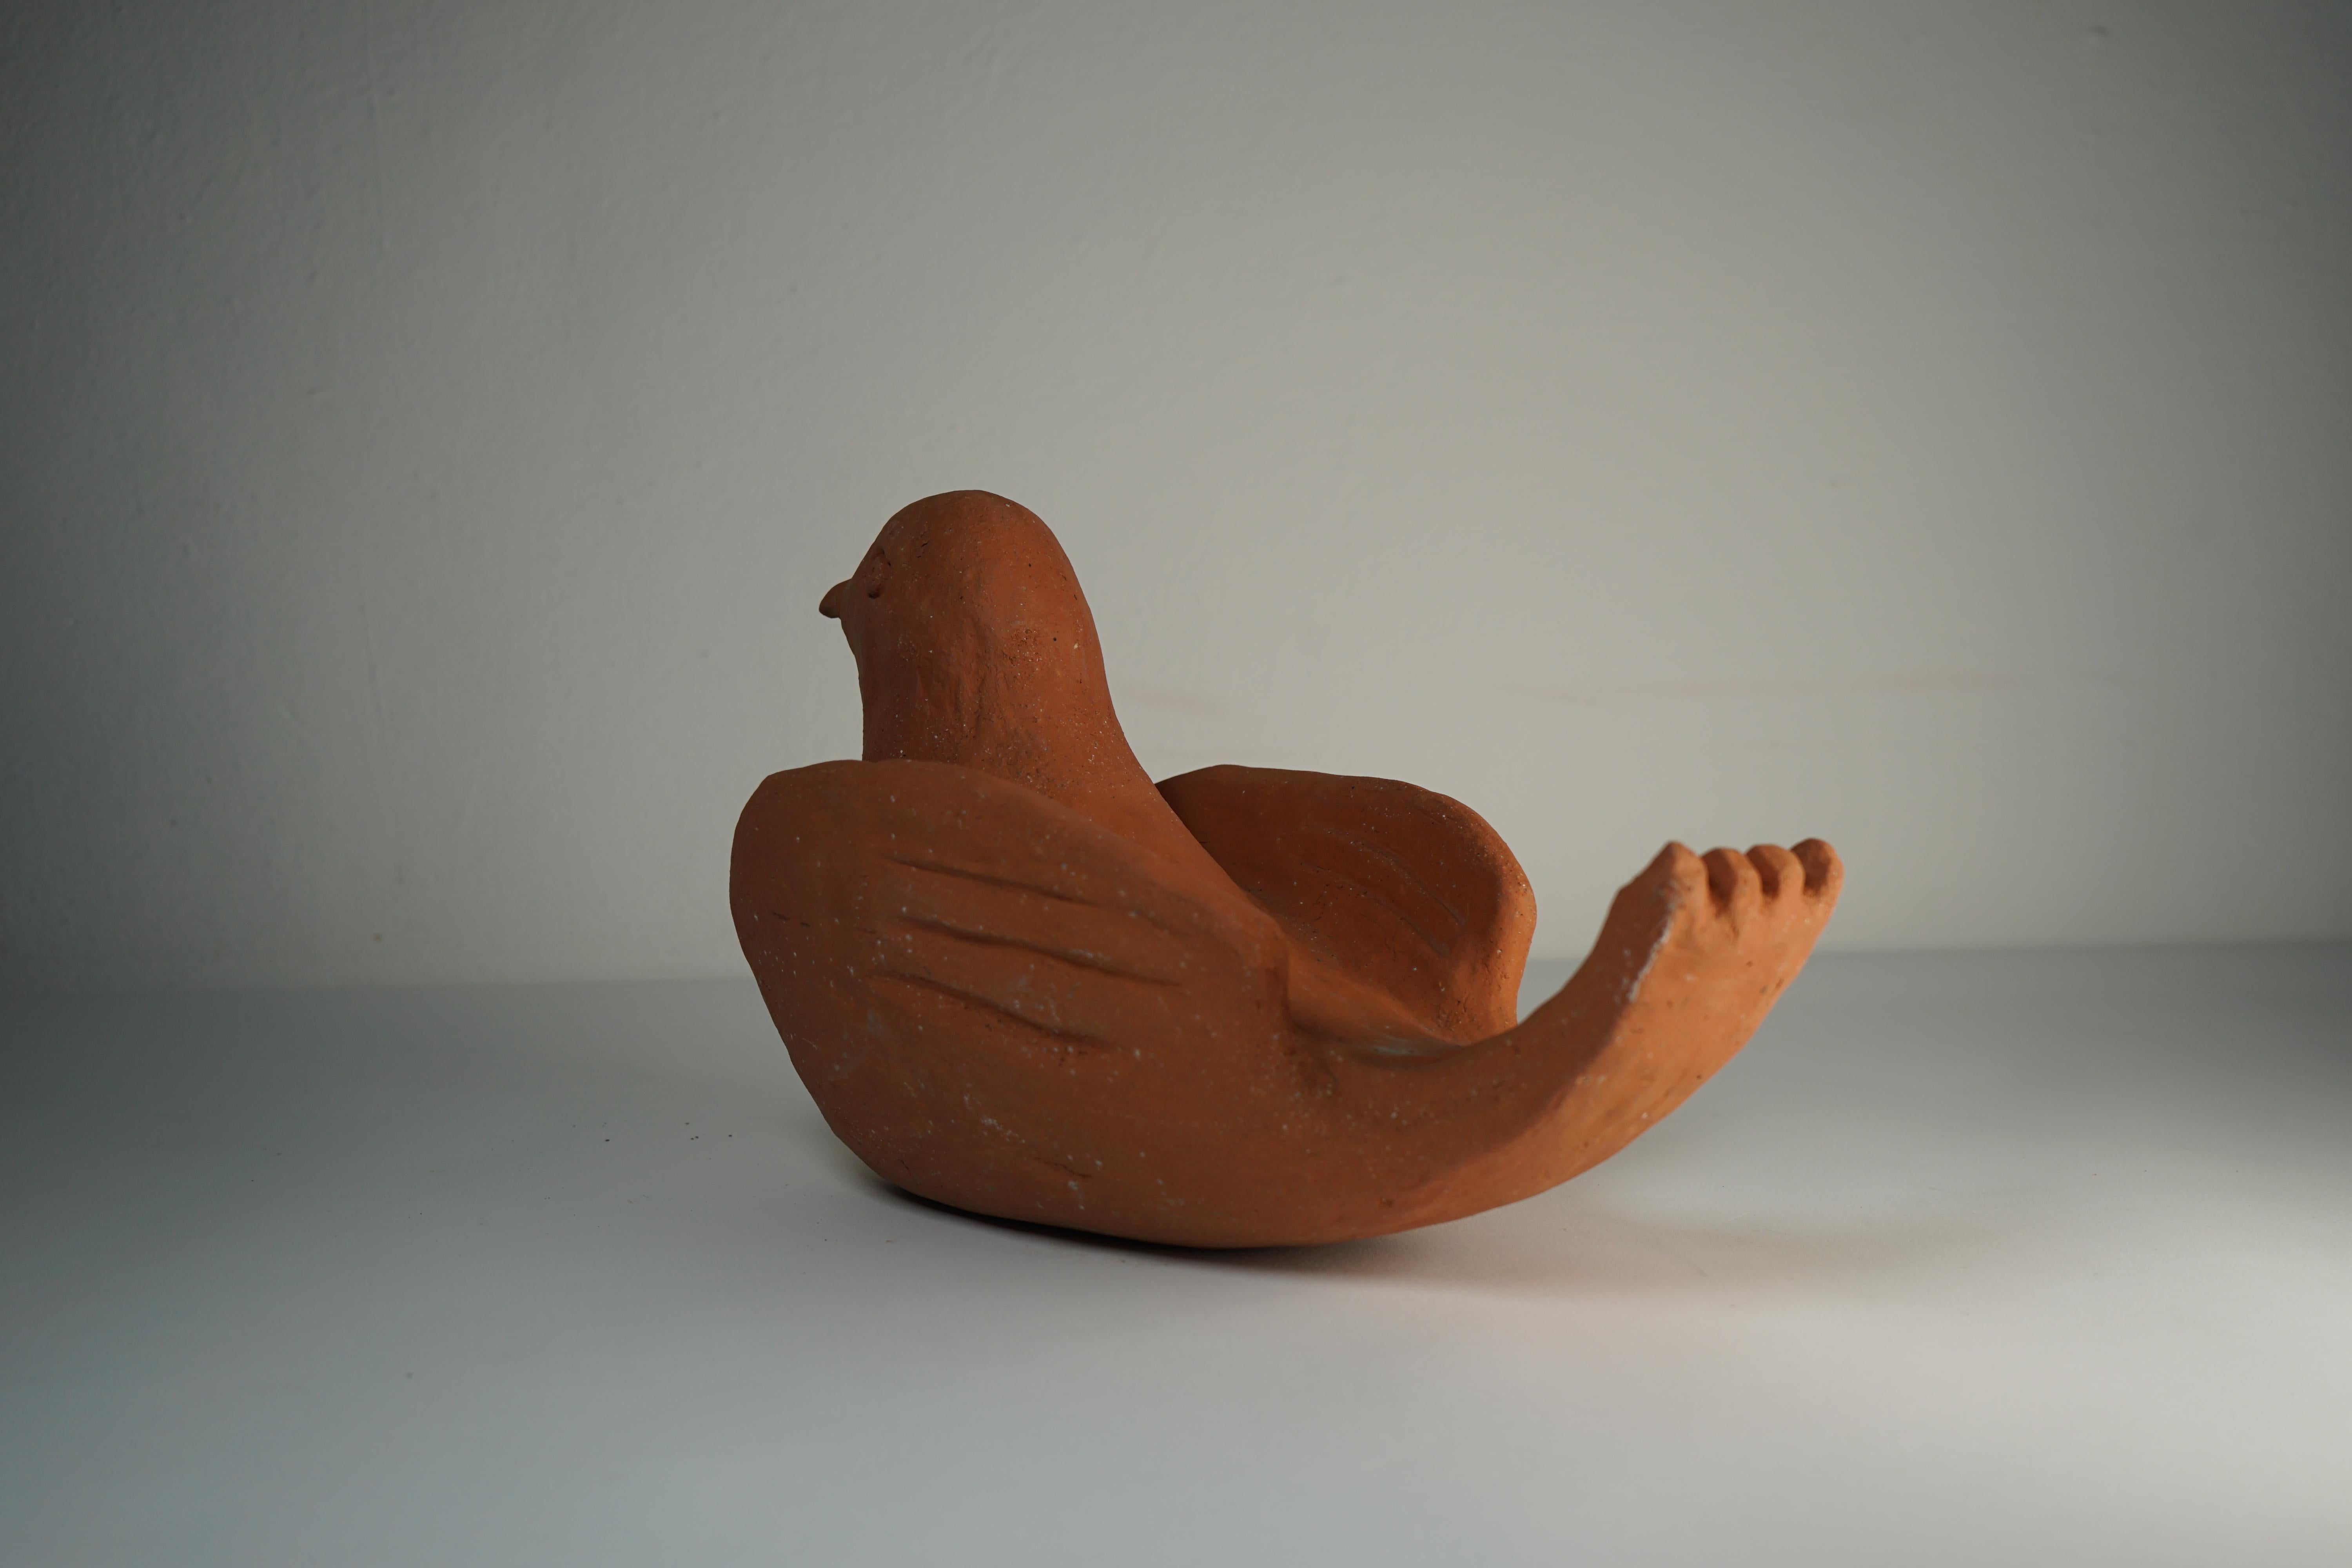 Ceramic sculpture Dove model designed by Nathalie Du Pasquier and produced by Alessio Sarri in 1993. Engraved in the pottery , signature of the artist and manufacturer .
The fox is part of a series of sculptures made up of 7 different